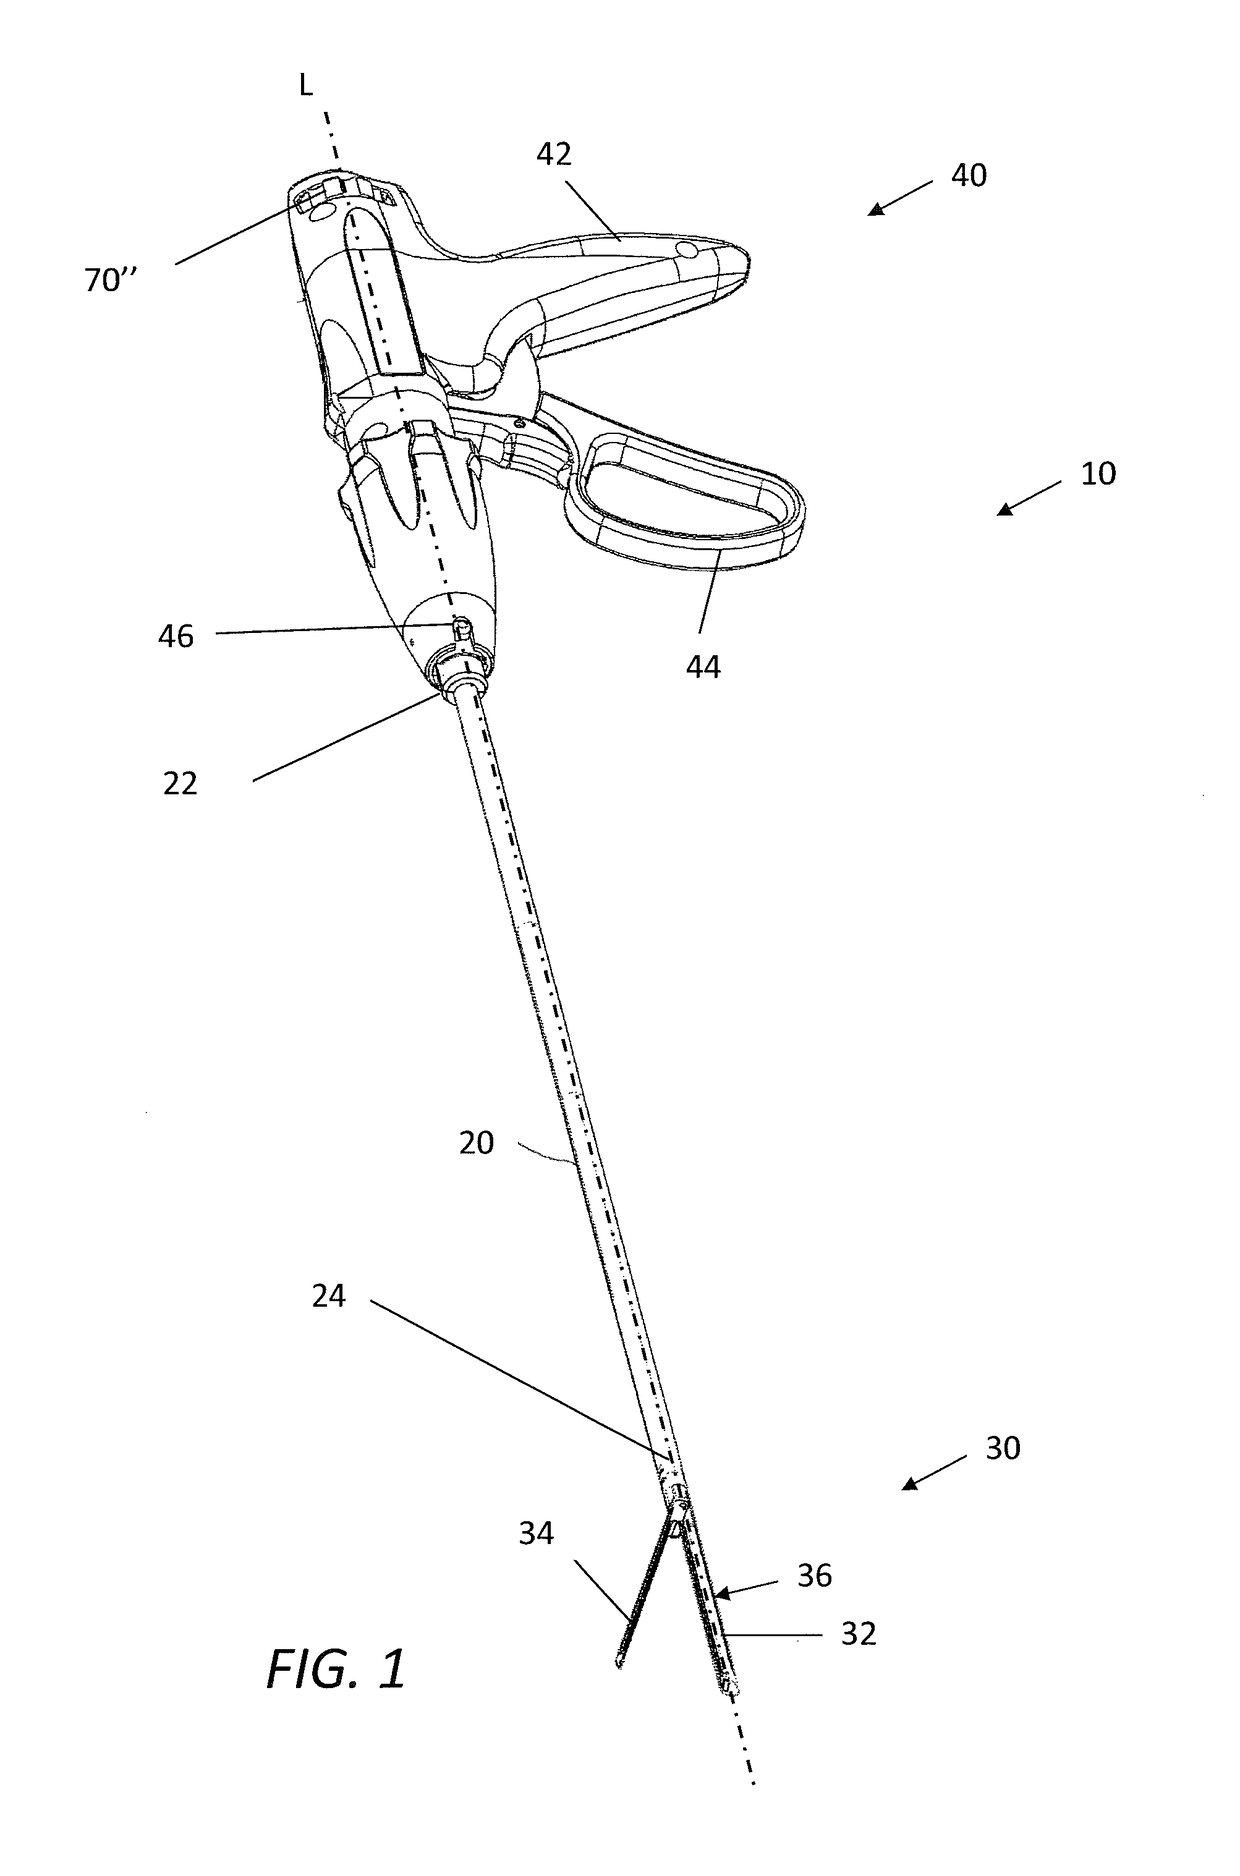 Surgical stapler handle assembly having actuation mechanism with longitudinally rotatable shaft